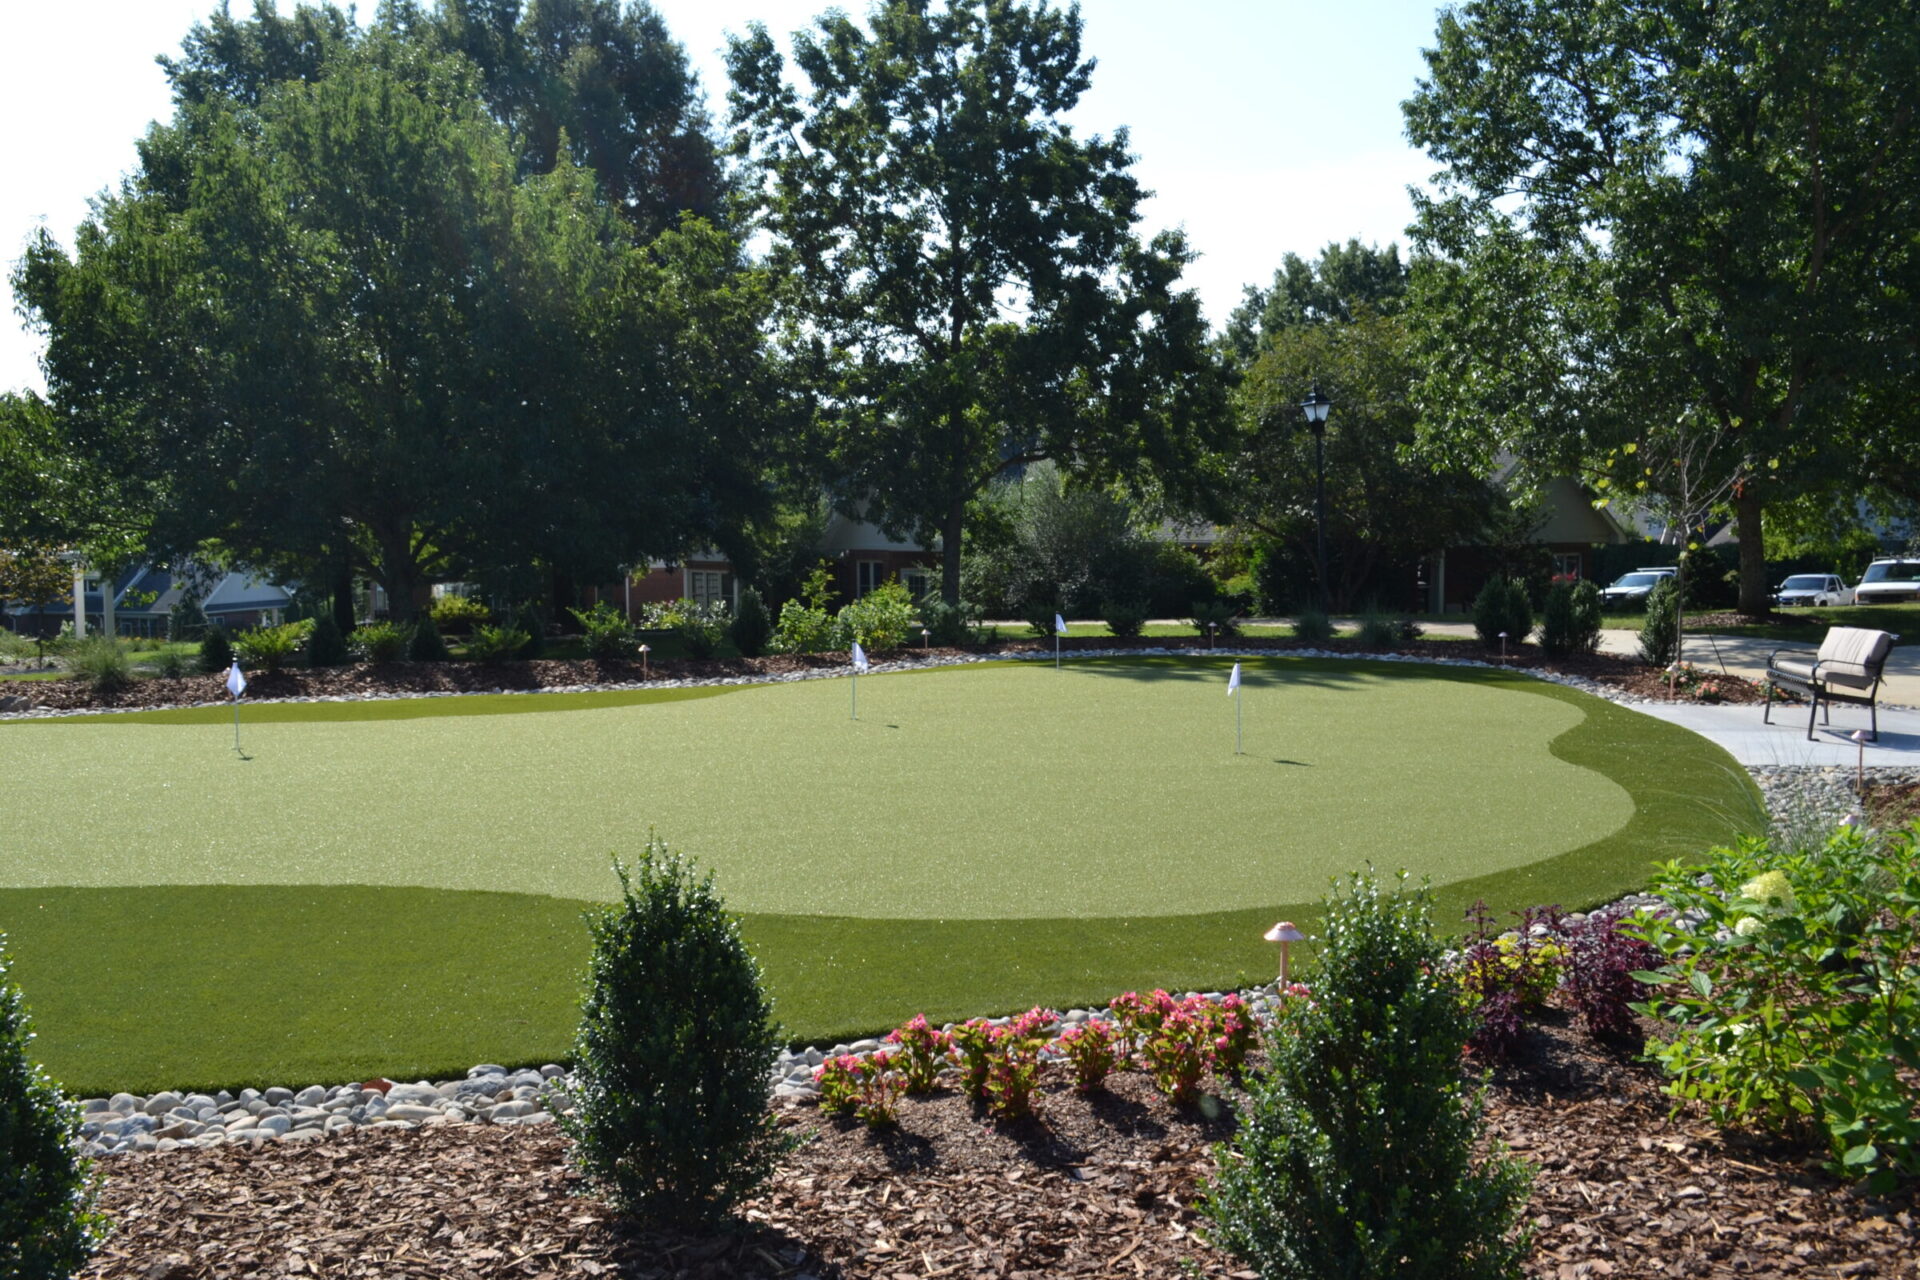 A well-manicured artificial putting green is surrounded by flowering plants, rocks, and trees in a sunny suburban garden setting with benches nearby.